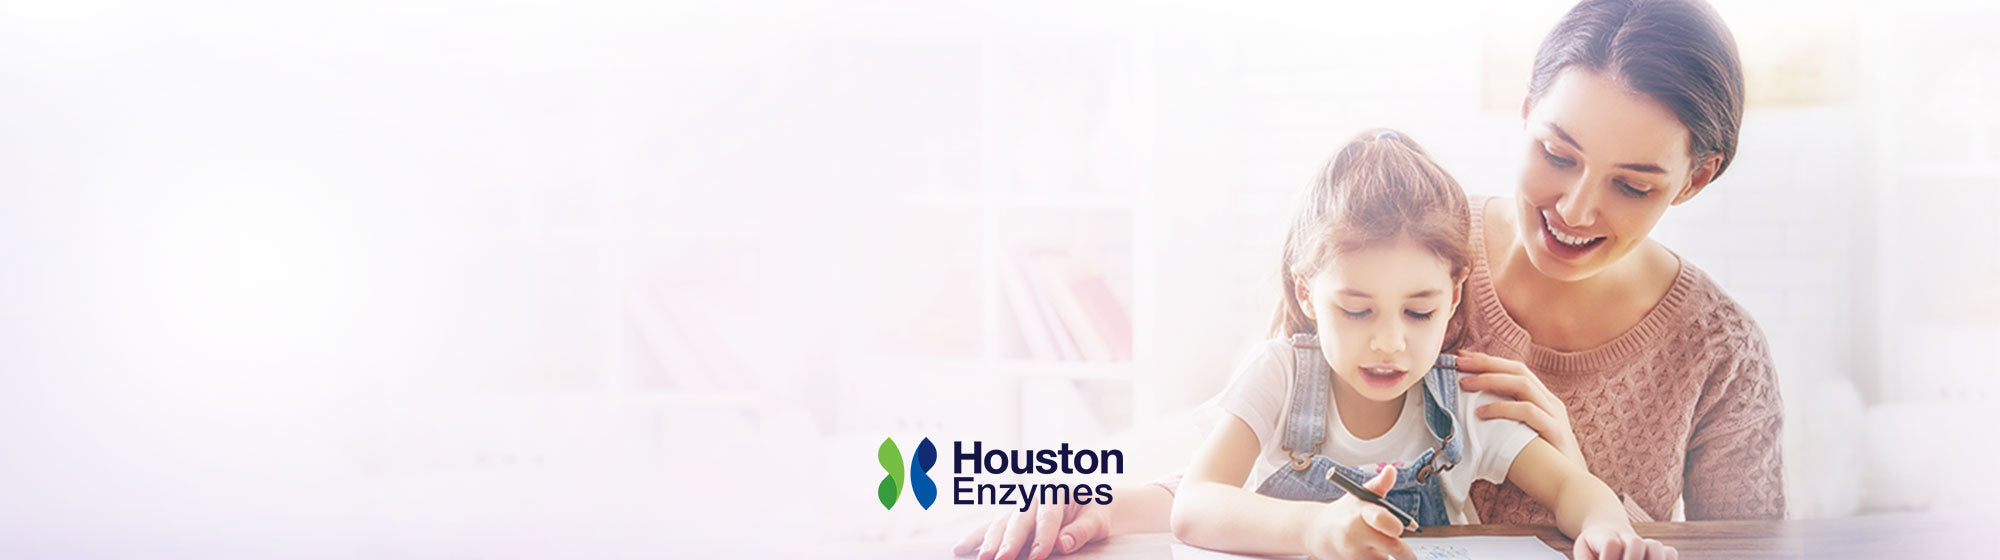 Discover what enzymes can do for you